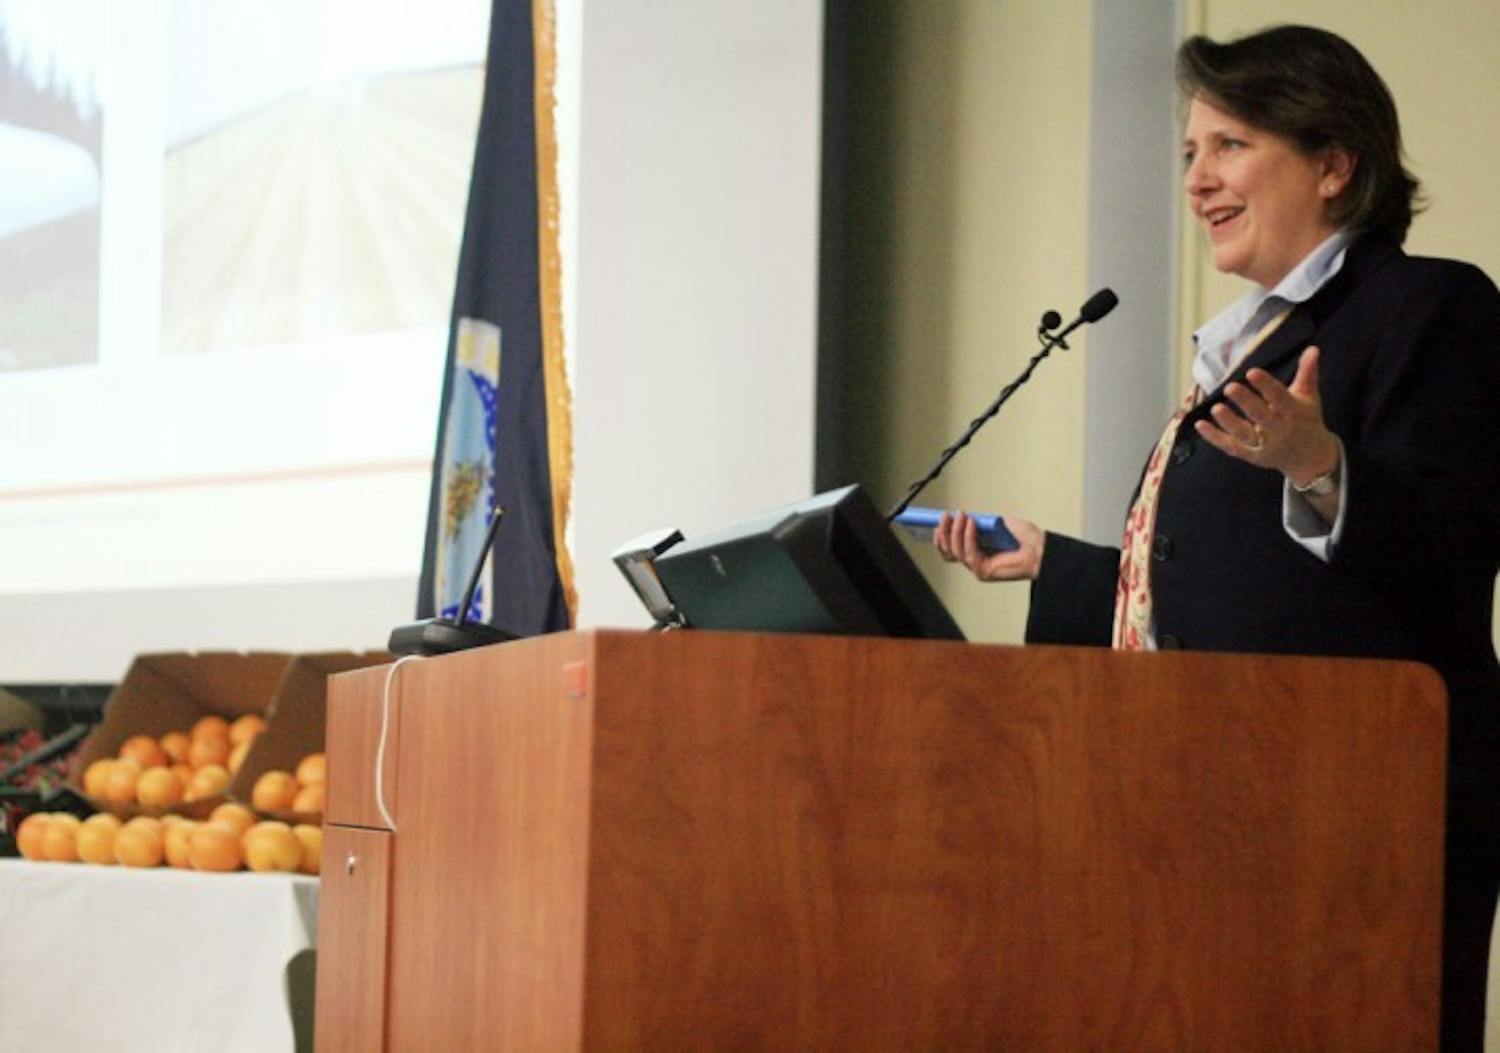 U.S. Department of Agriculture Deputy Secretary Kathleen Merrigan speaks about agriculture and its importance in the U.S. at the Straughn Extension Professional Development Center on Thursday night.